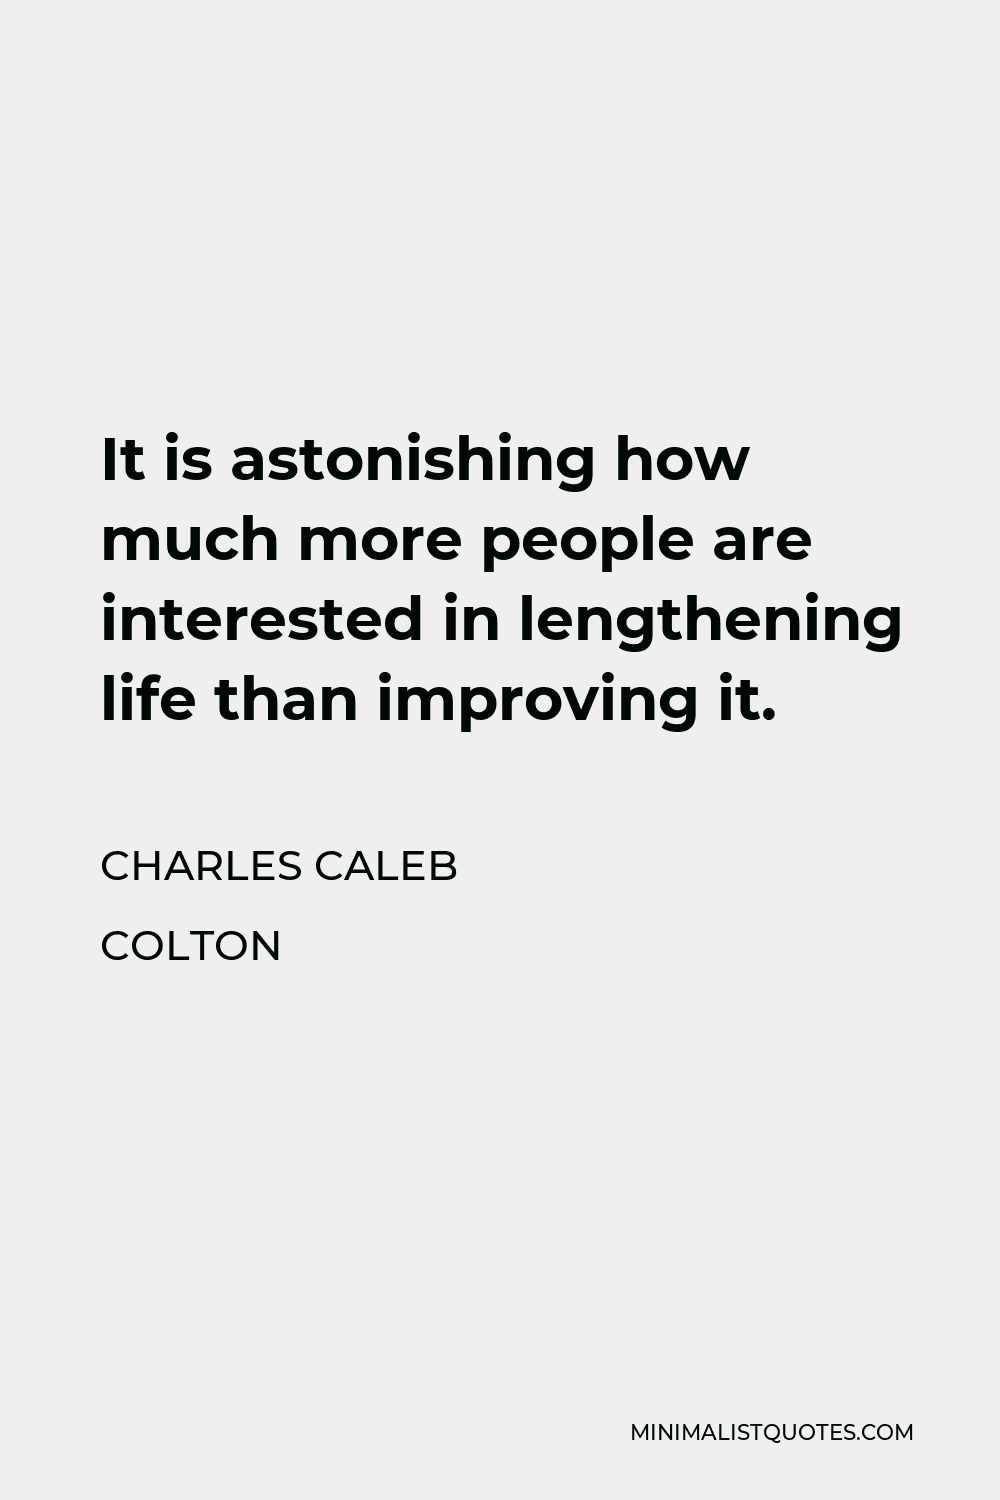 Charles Caleb Colton Quote - It is astonishing how much more people are interested in lengthening life than improving it.